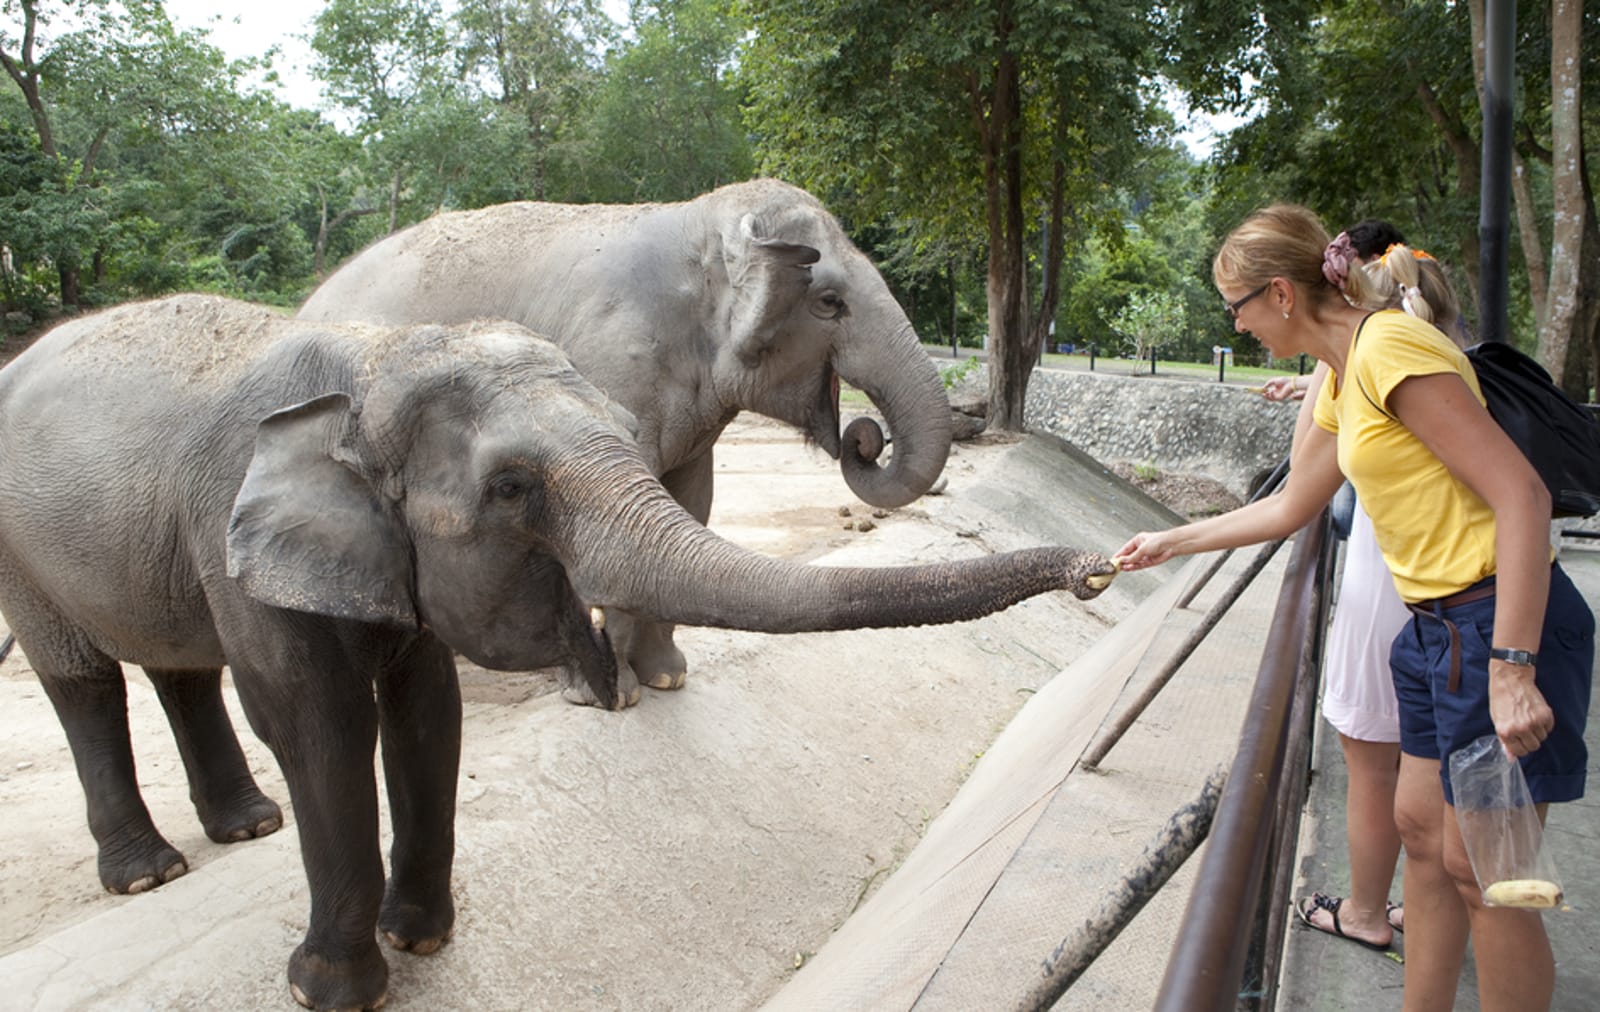 How Zoos Create a False Sense of Entitlement When it Comes to Interacting With Animals